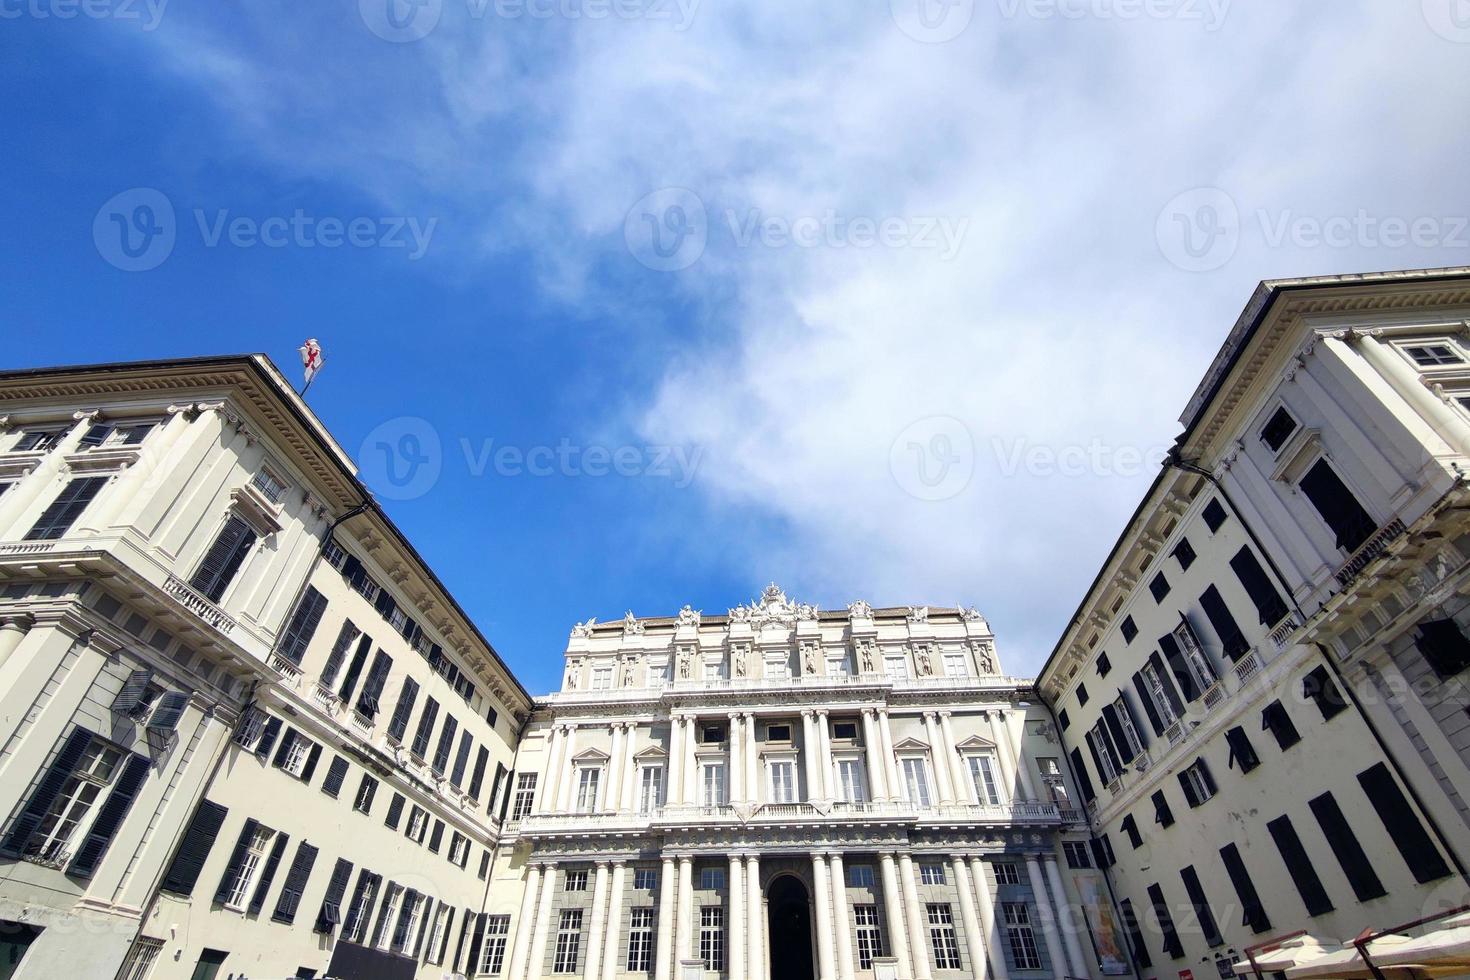 Ducal Palace in Genoa historic building photo